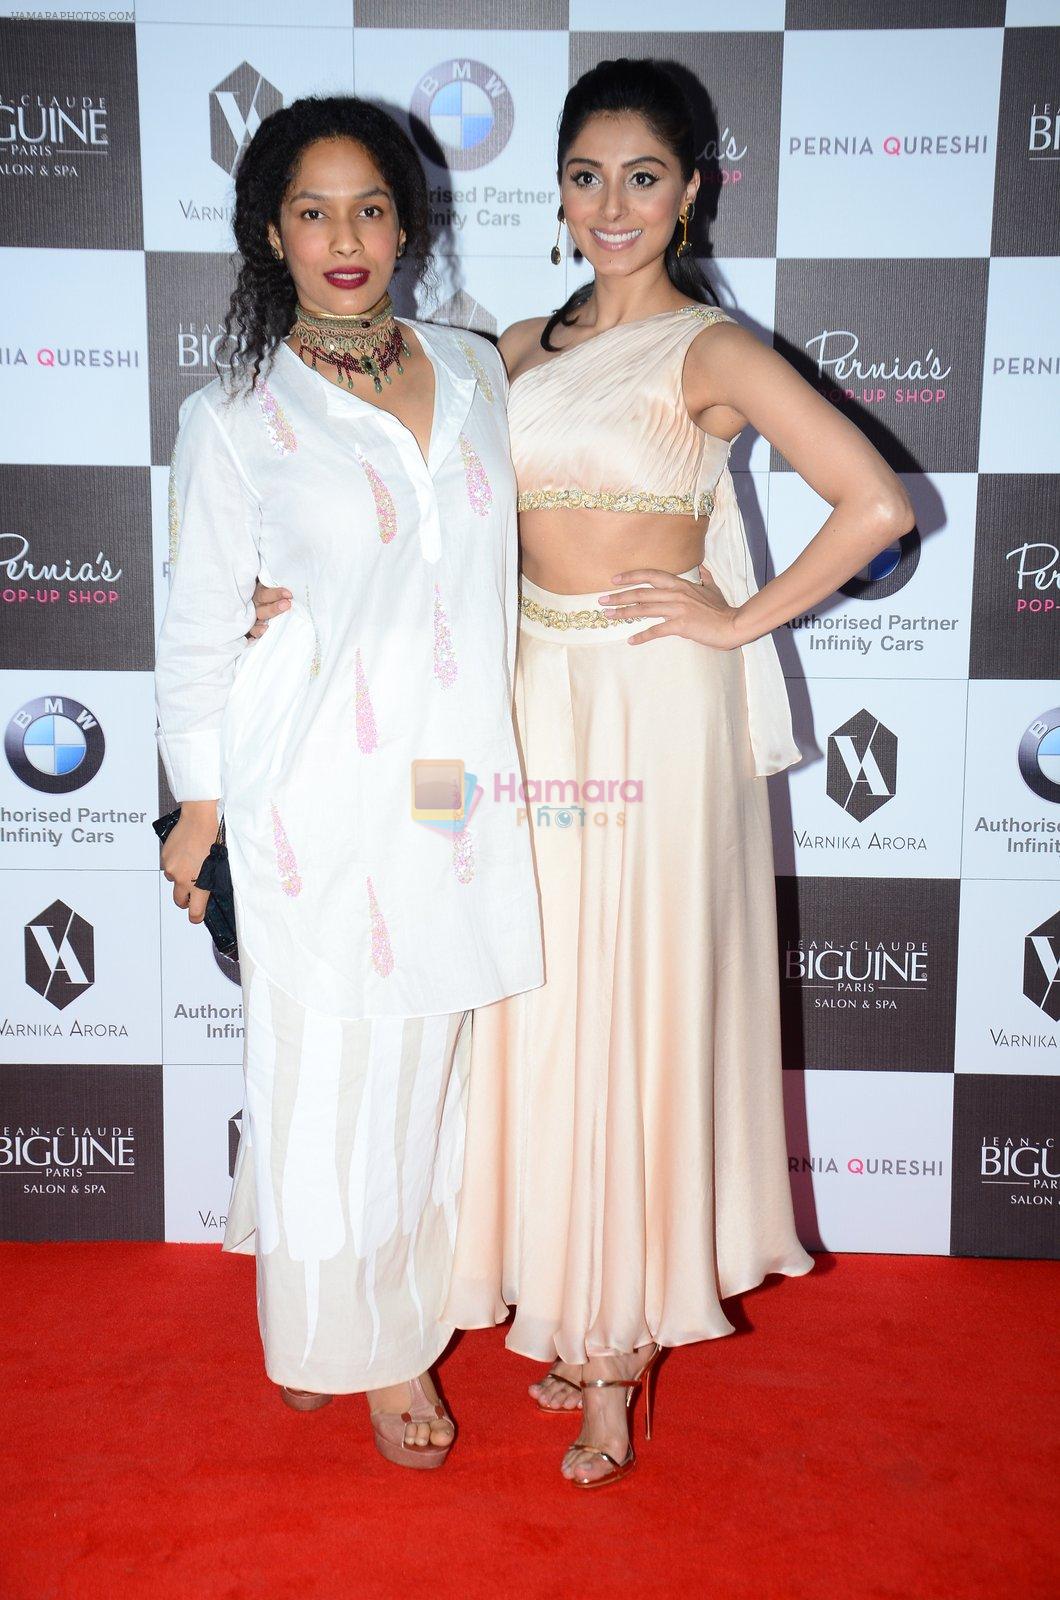 Masaba on the red carpet for Pernia Qureshi's show on 9th Jne 2016